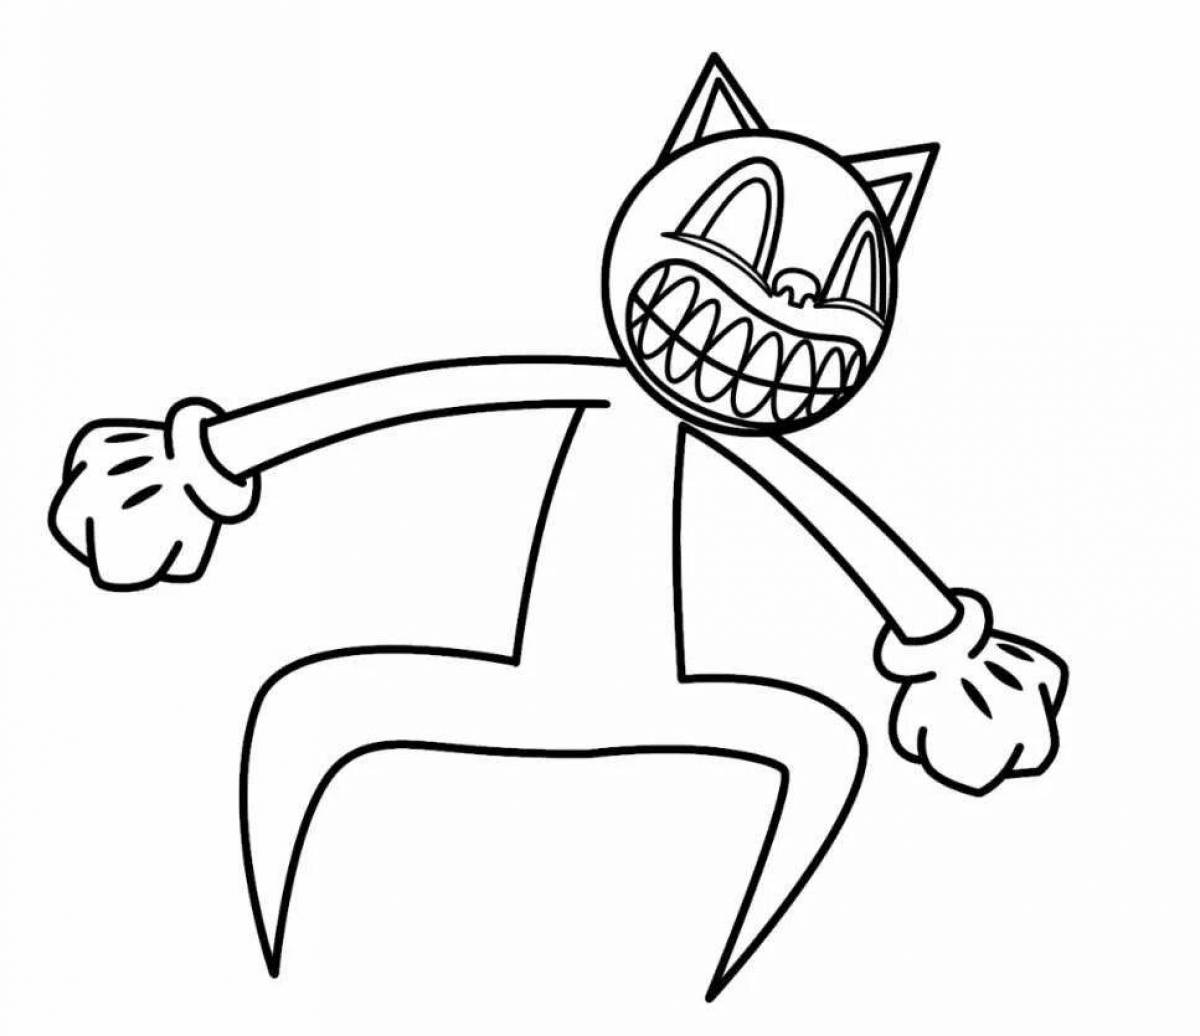 Quirky cat outline coloring page